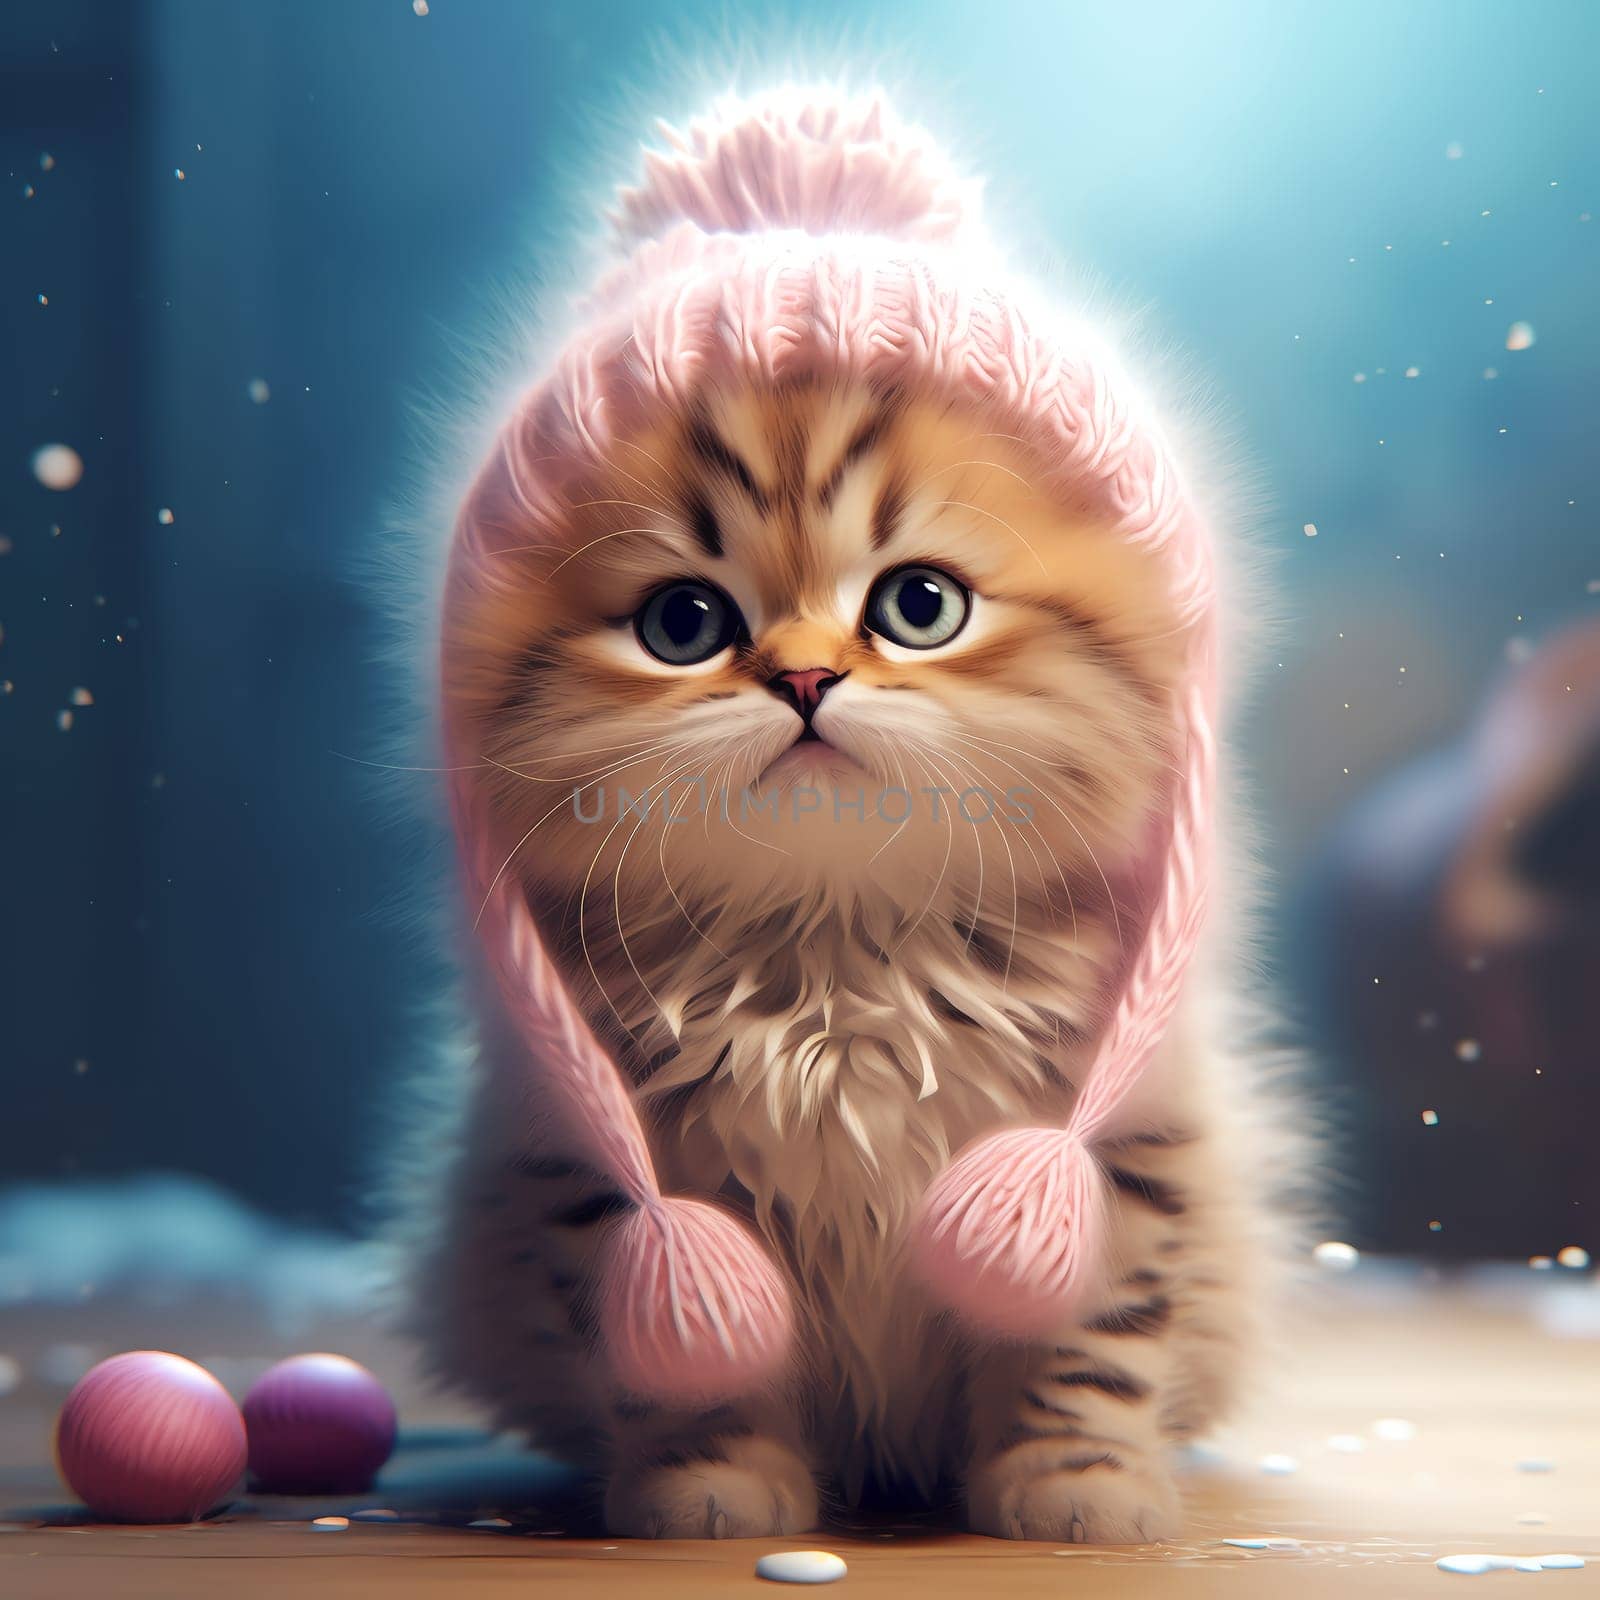 Adorable kitten in a knitted hat and scarf. Cute cat in a Christmas composition with bokeh effect.  by AndreyKENO